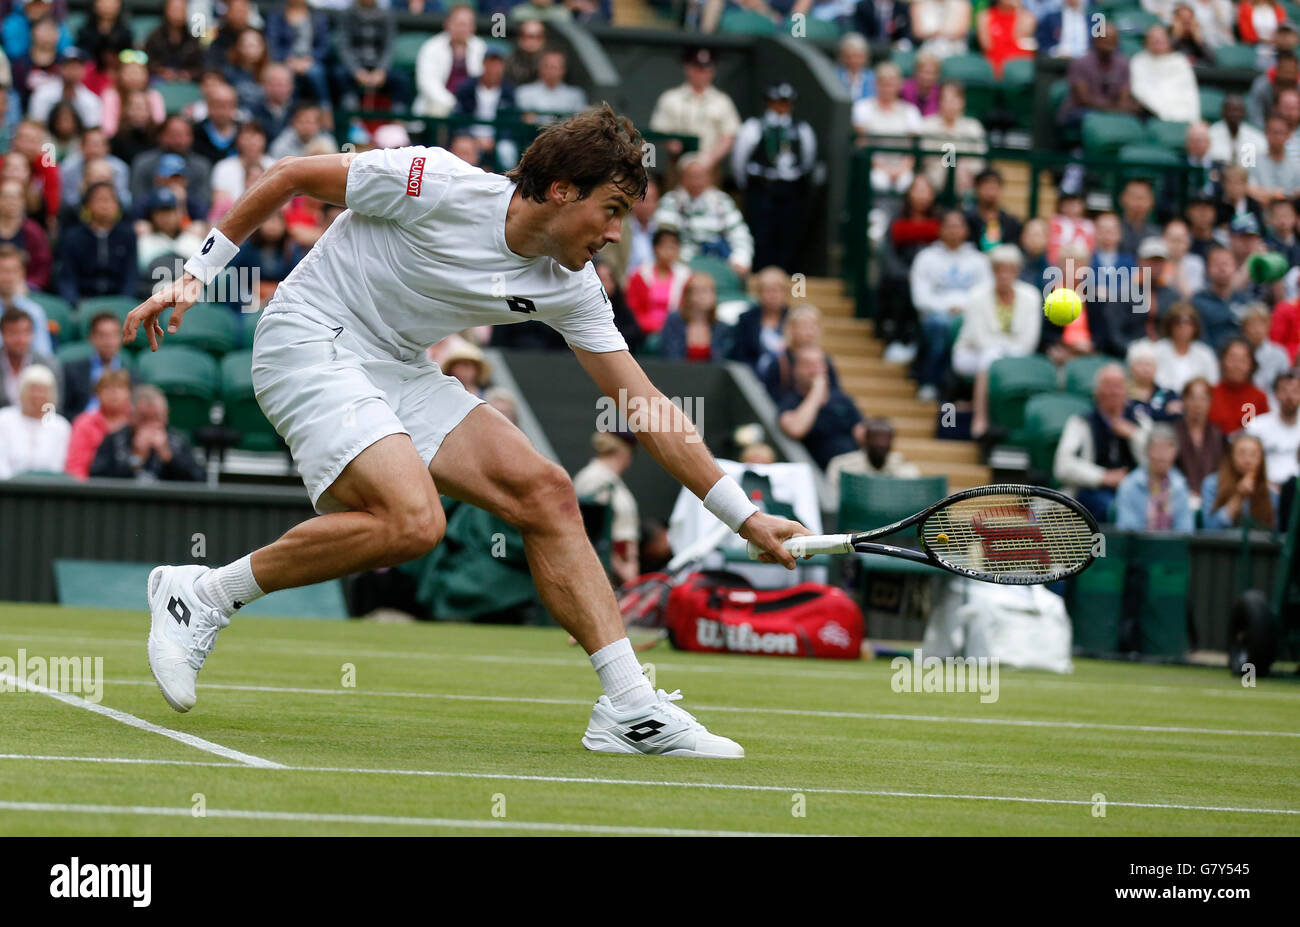 London, UK. 27th June, 2016. Guido Pella of Argentina returns the ball to Roger Federer of Switzerland during the men's singles first round match at the 2016 Wimbledon Tennis Championships in London, June 27, 2016. Guido Pella lost 0-3. © Ye Pingfan/Xinhua/Alamy Live News Stock Photo